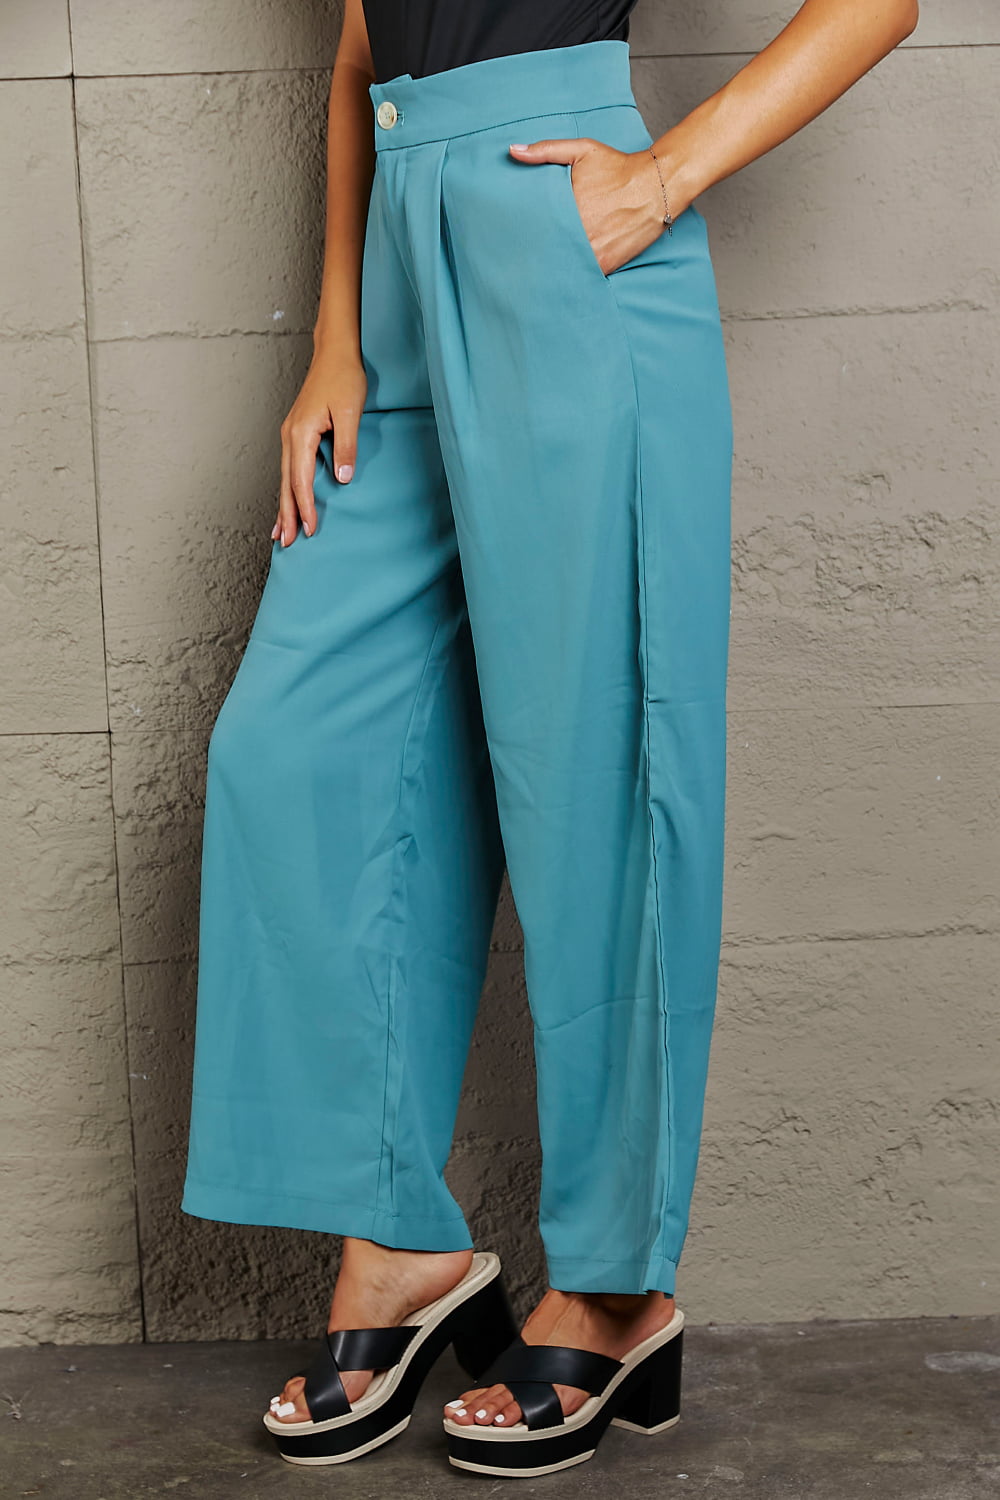 Slate Gray Wide Leg Buttoned Pants Clothing